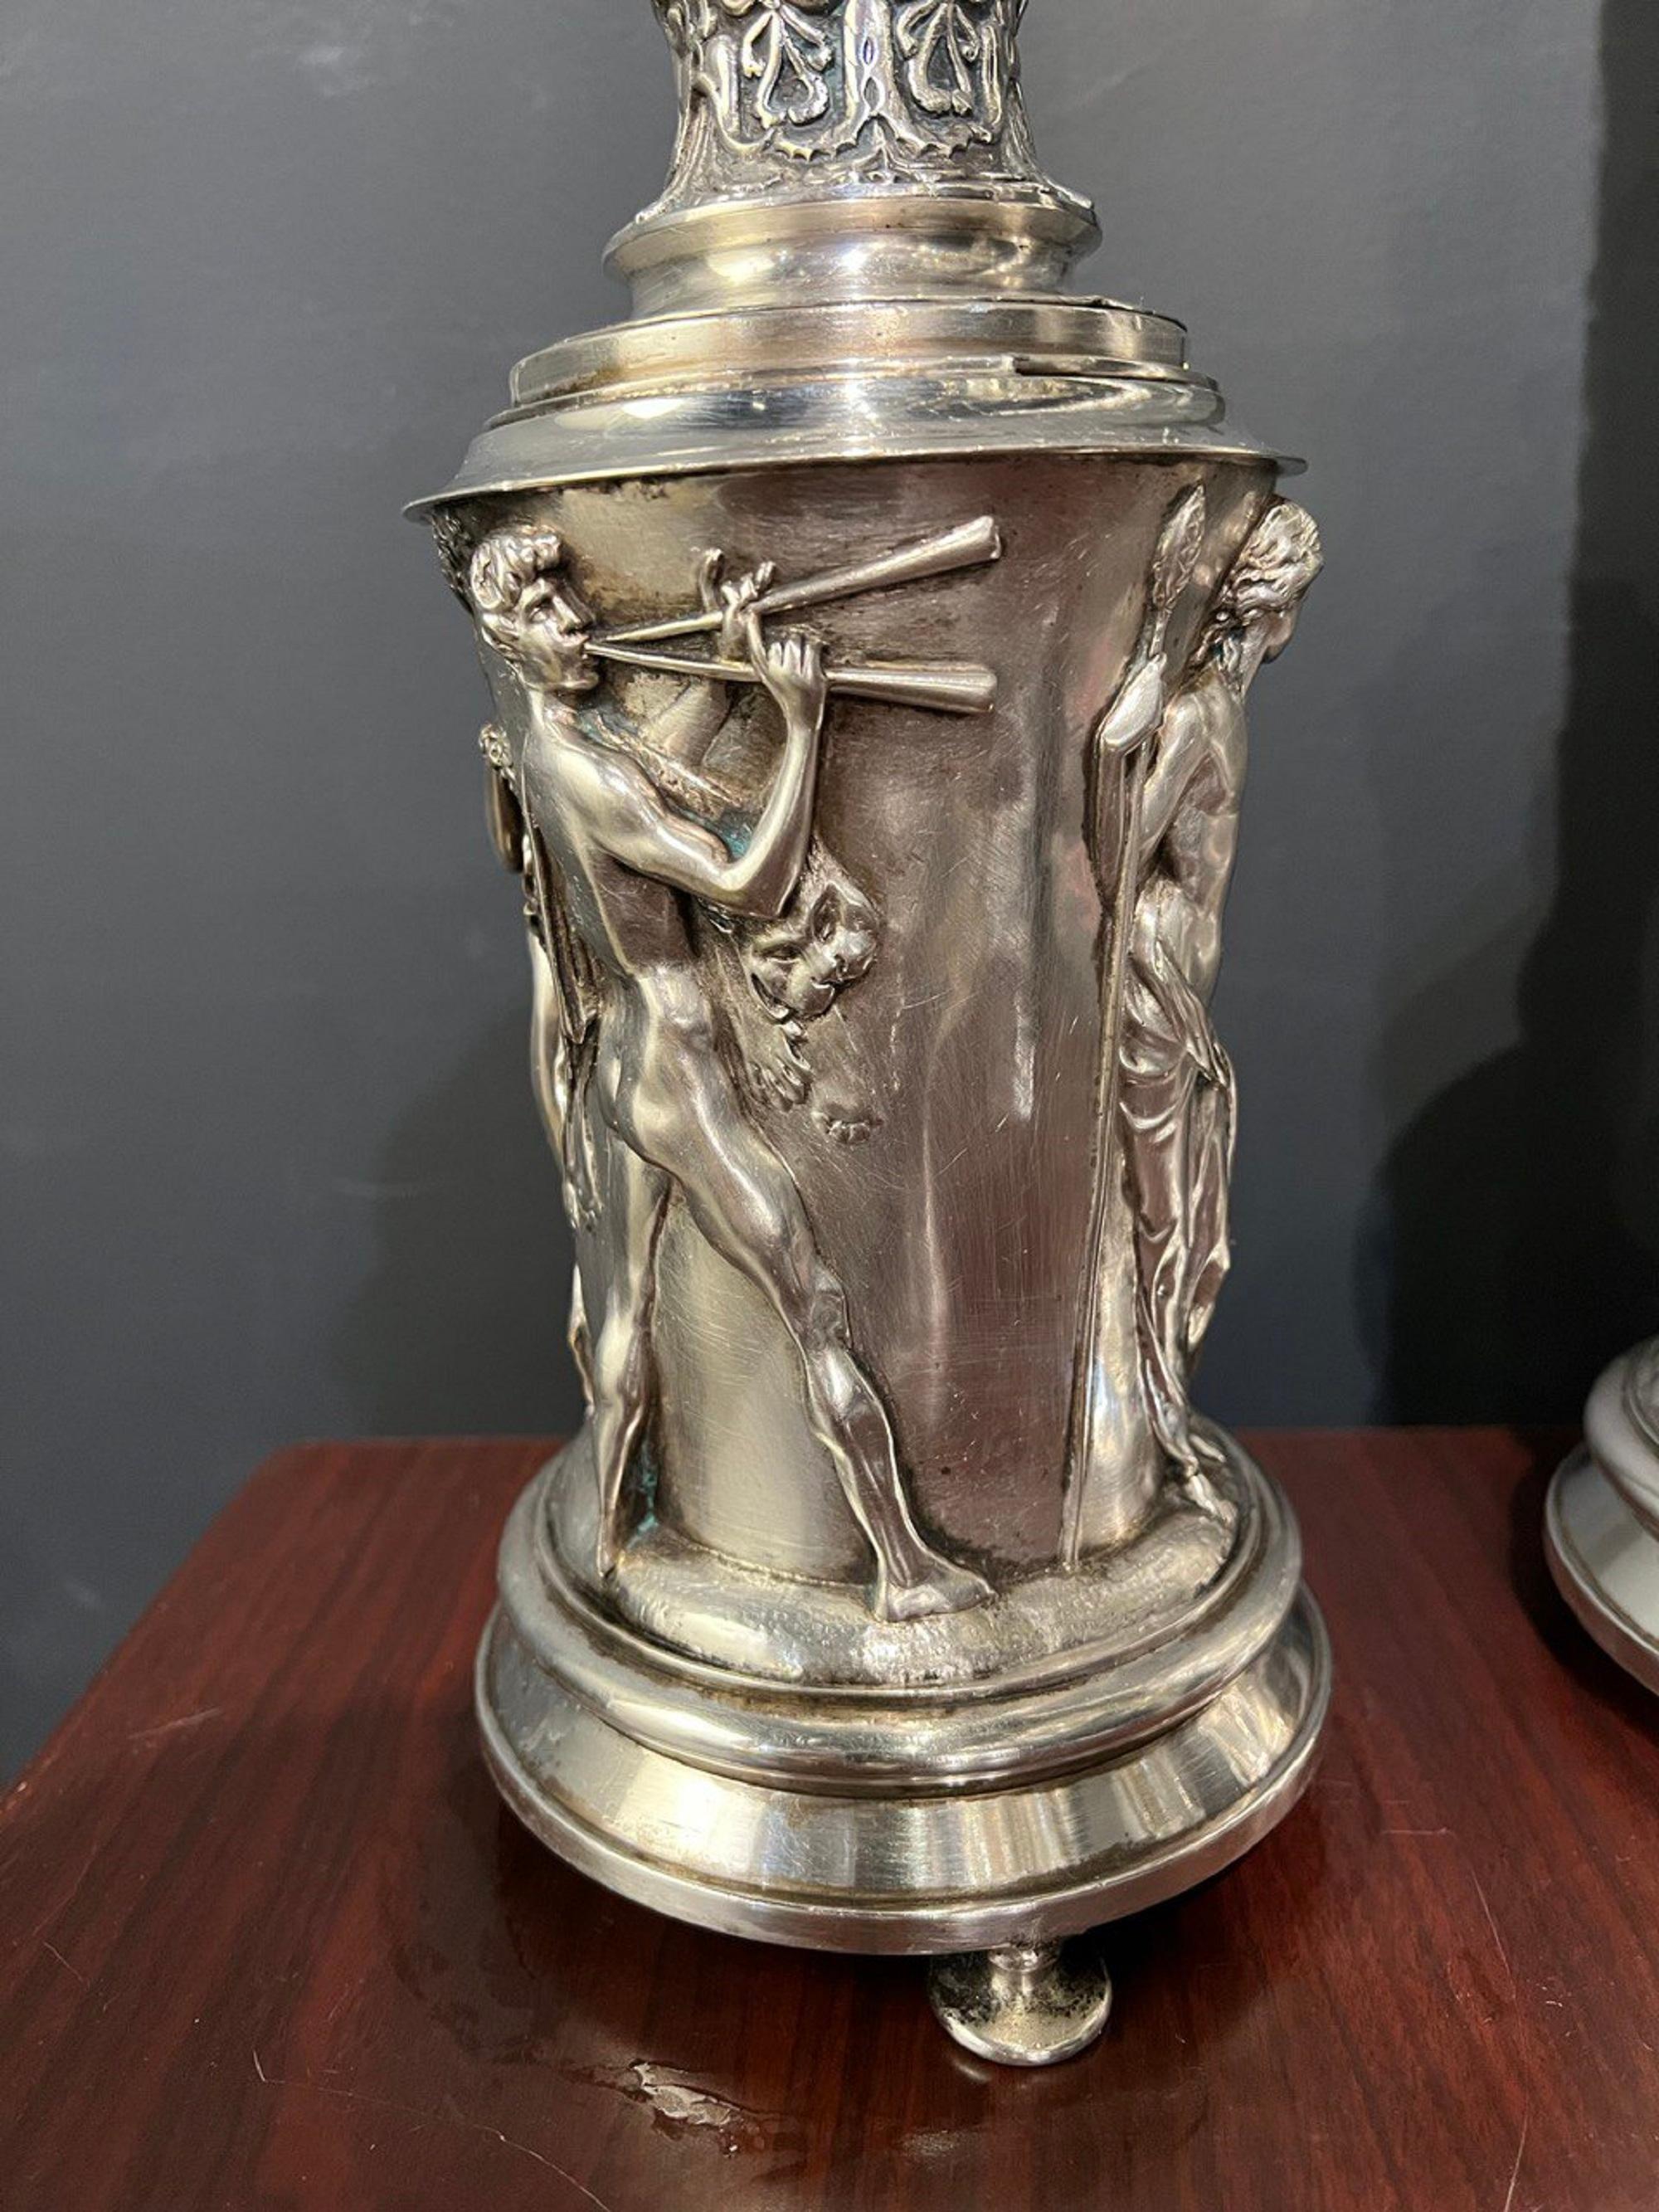 The circa 1920s neoclassic Greek style Caldwell silver table lamp with a lot of details: people body on bottom part and leaves on top